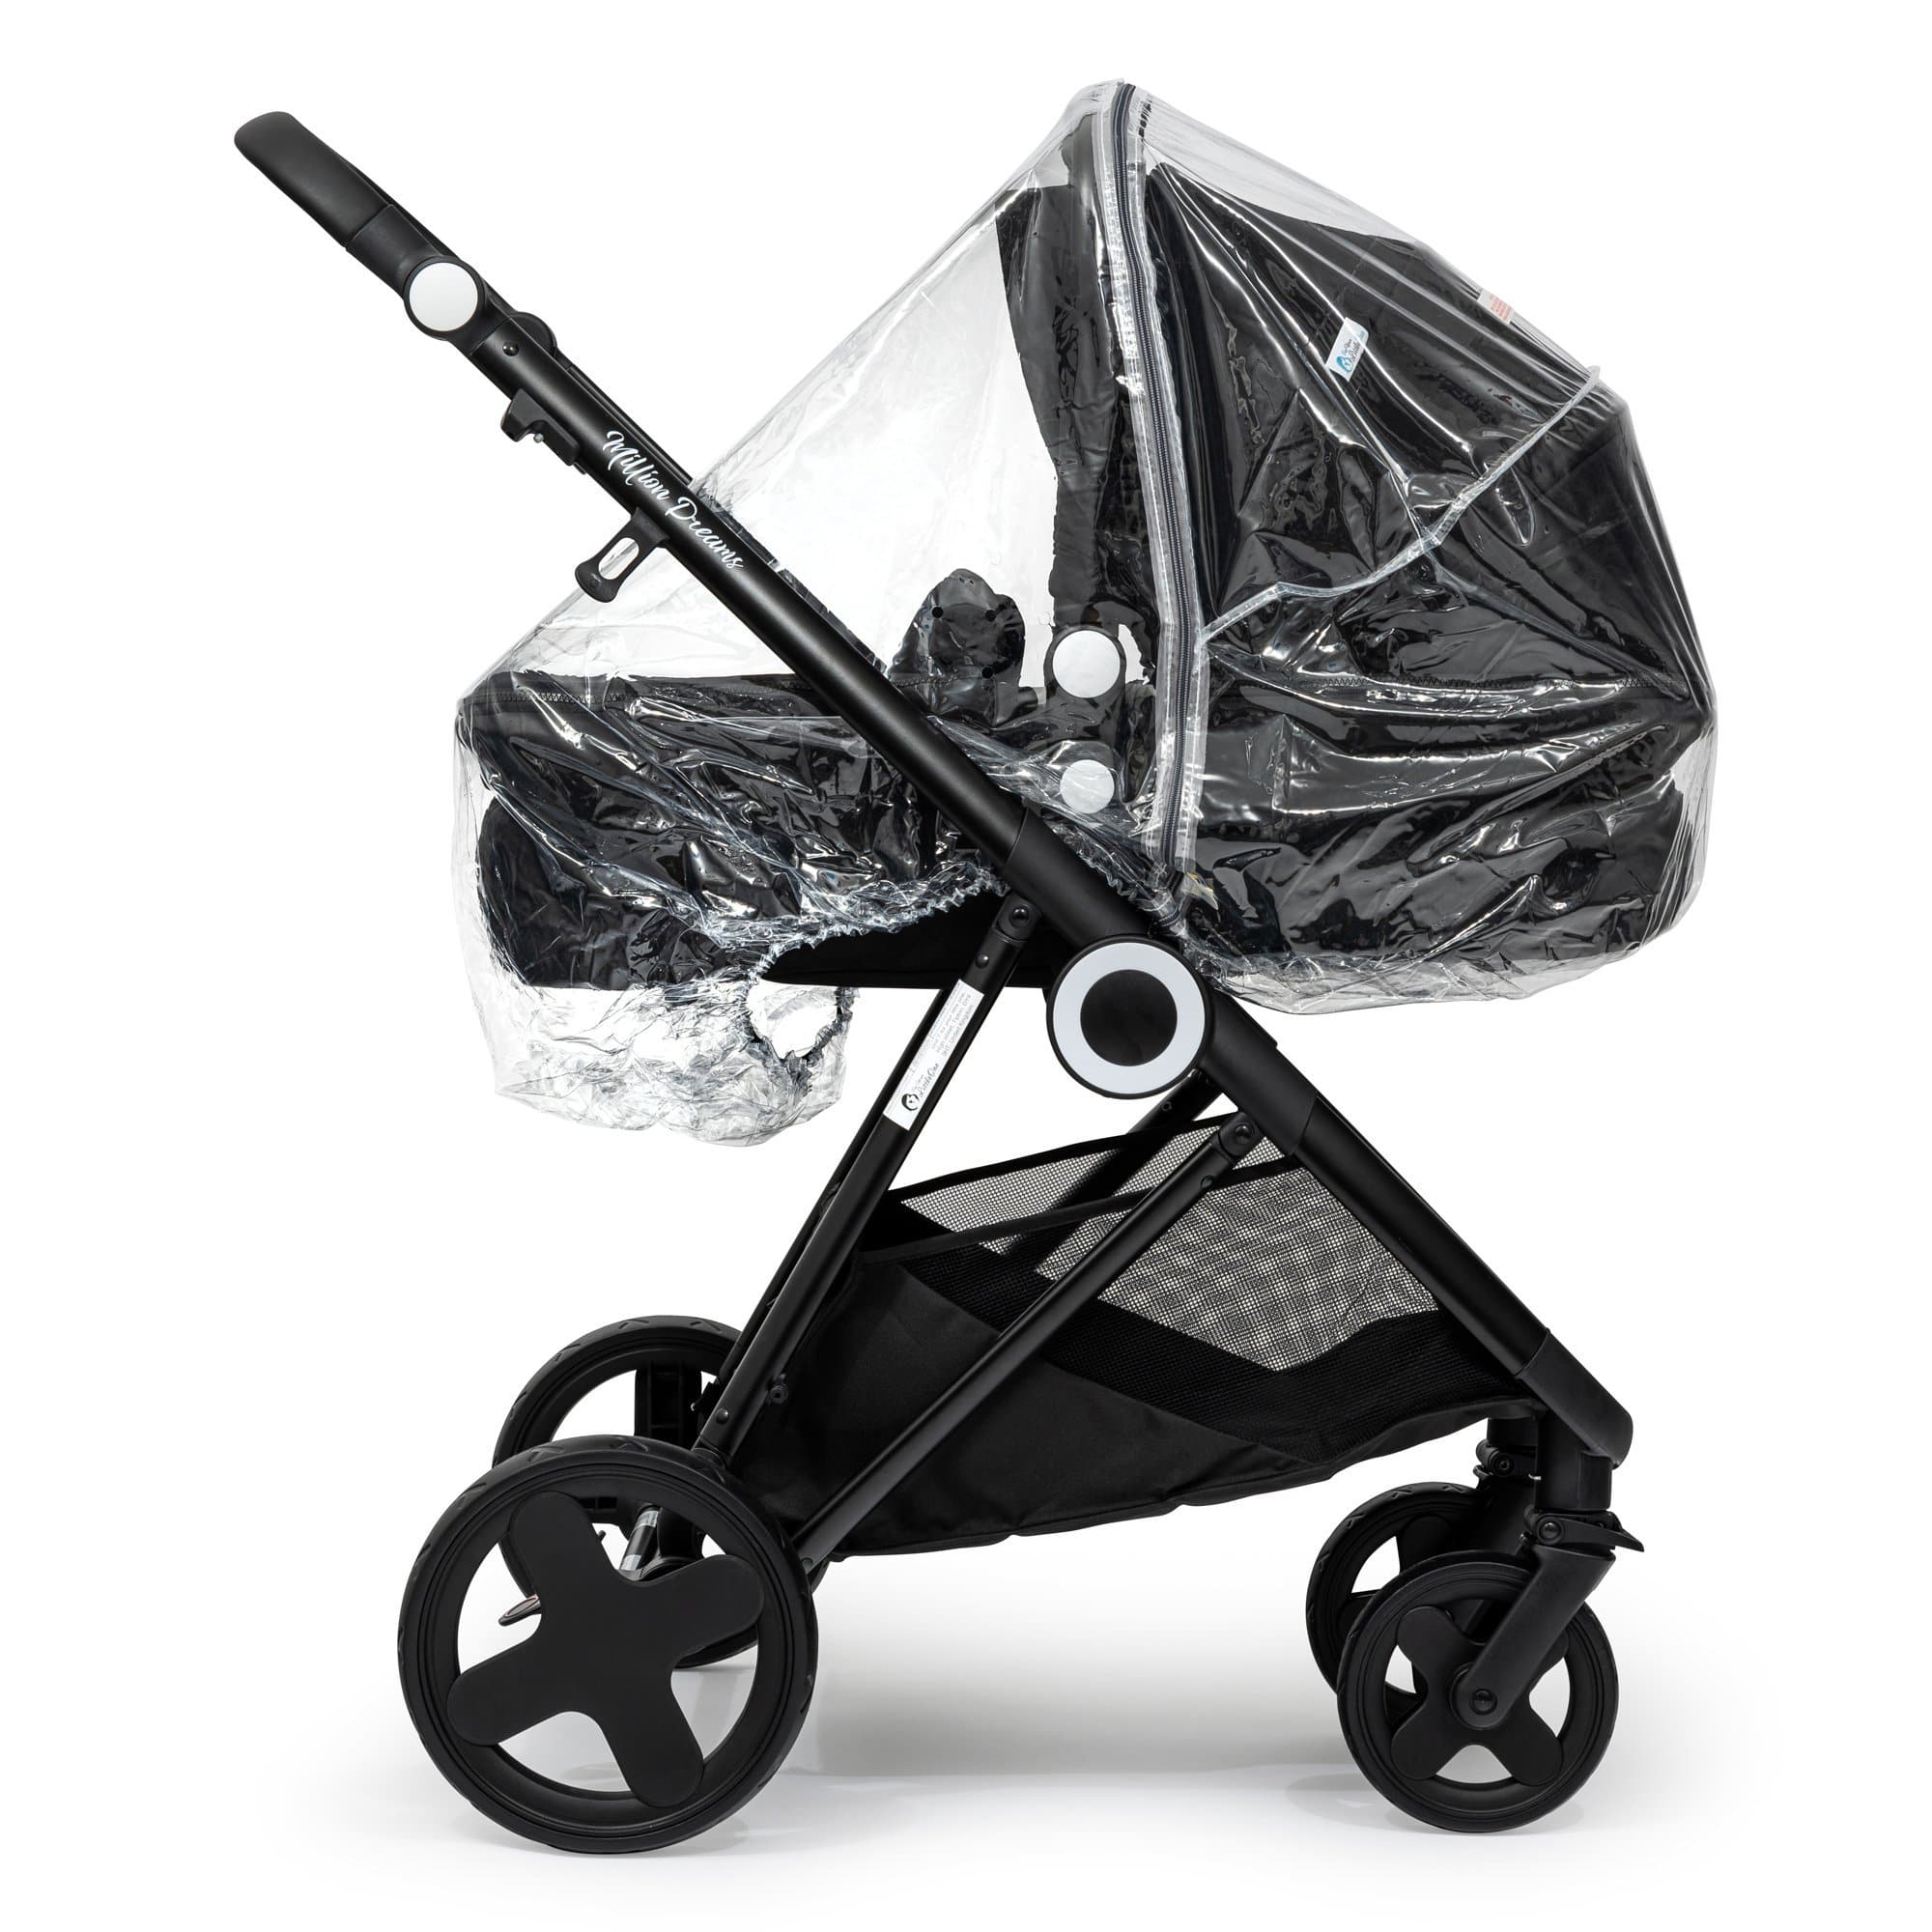 2 in 1 Rain Cover Compatible with BabyDan - Fits All Models - For Your Little One